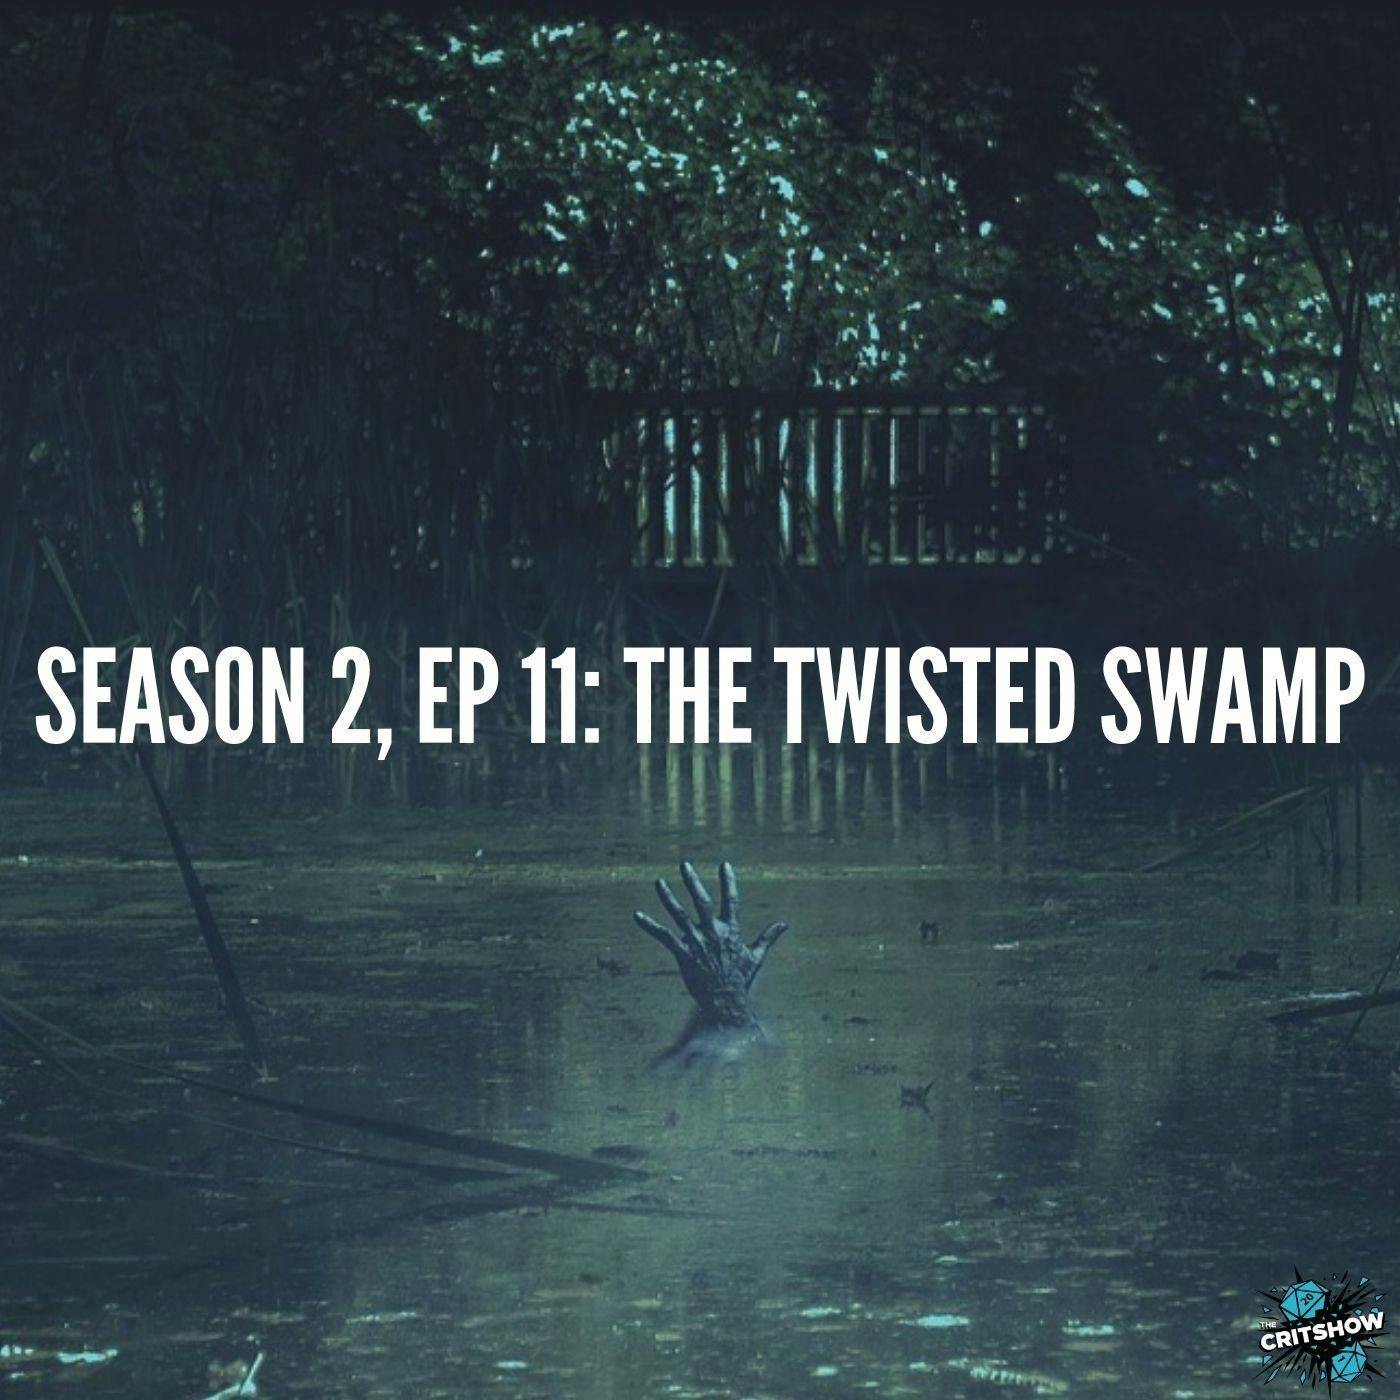 The Twisted Swamp (S2, E11)